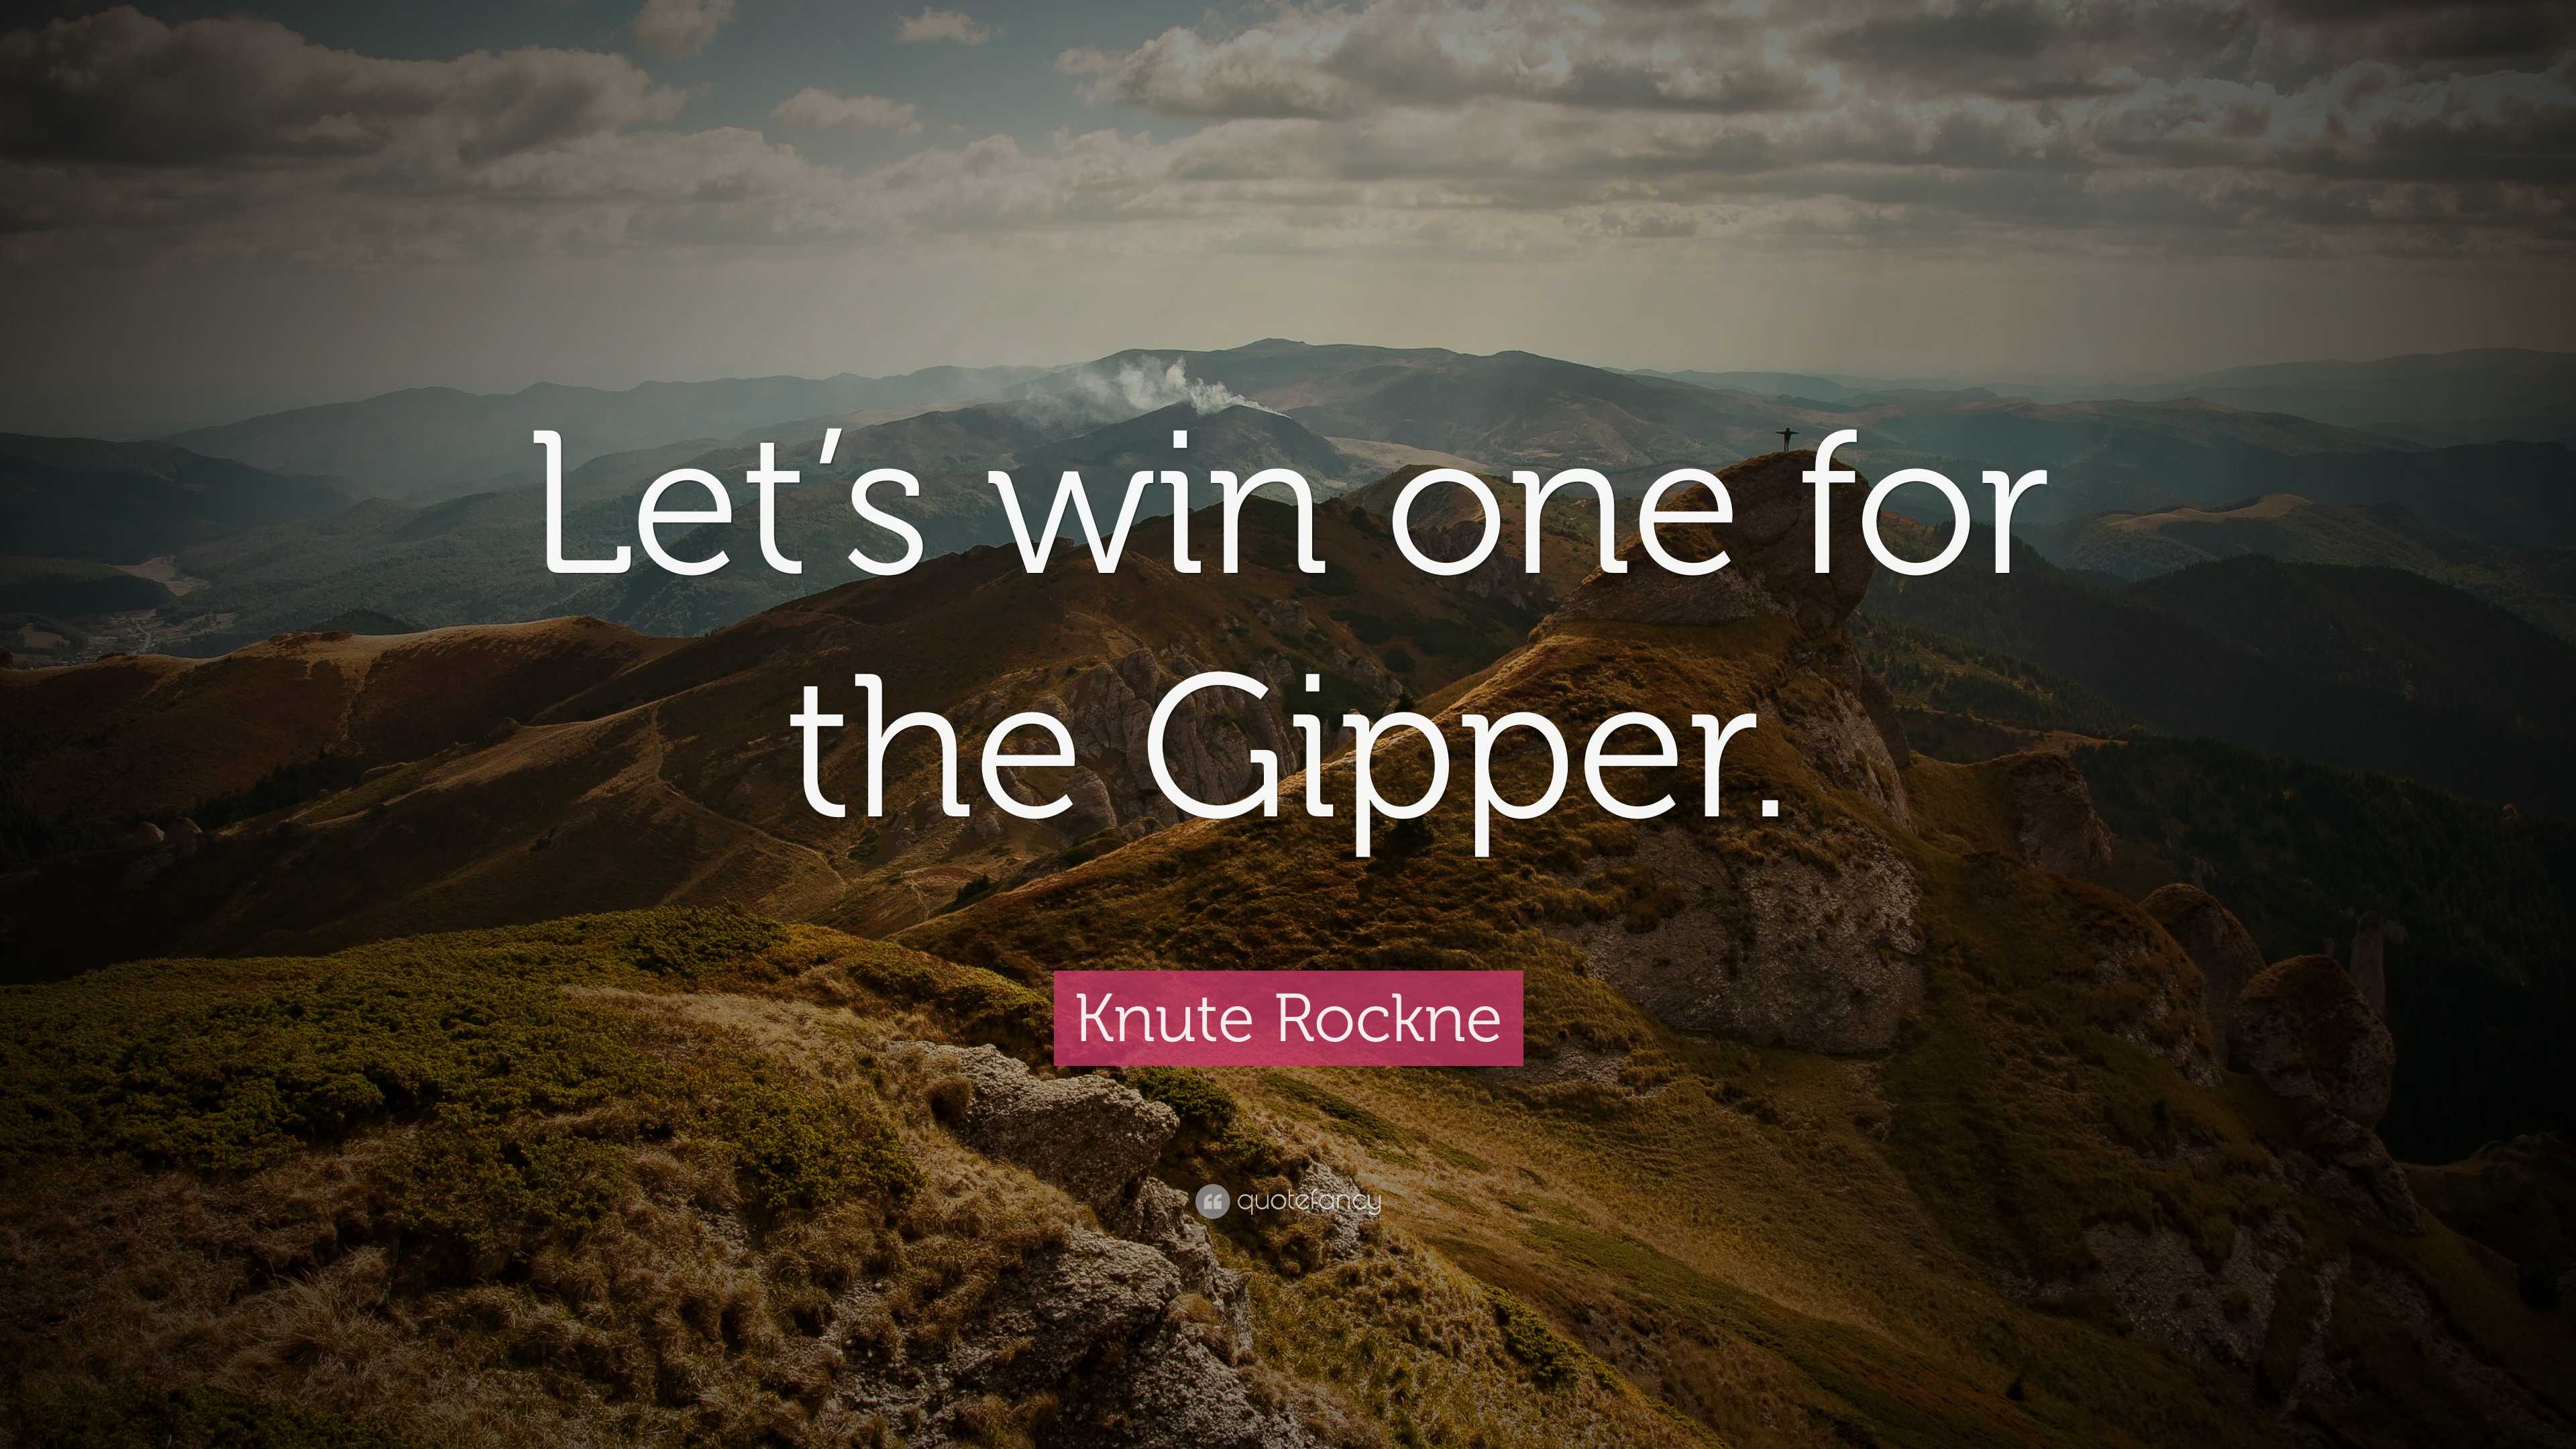 2488855 Knute Rockne Quote Let s win one for the Gipper